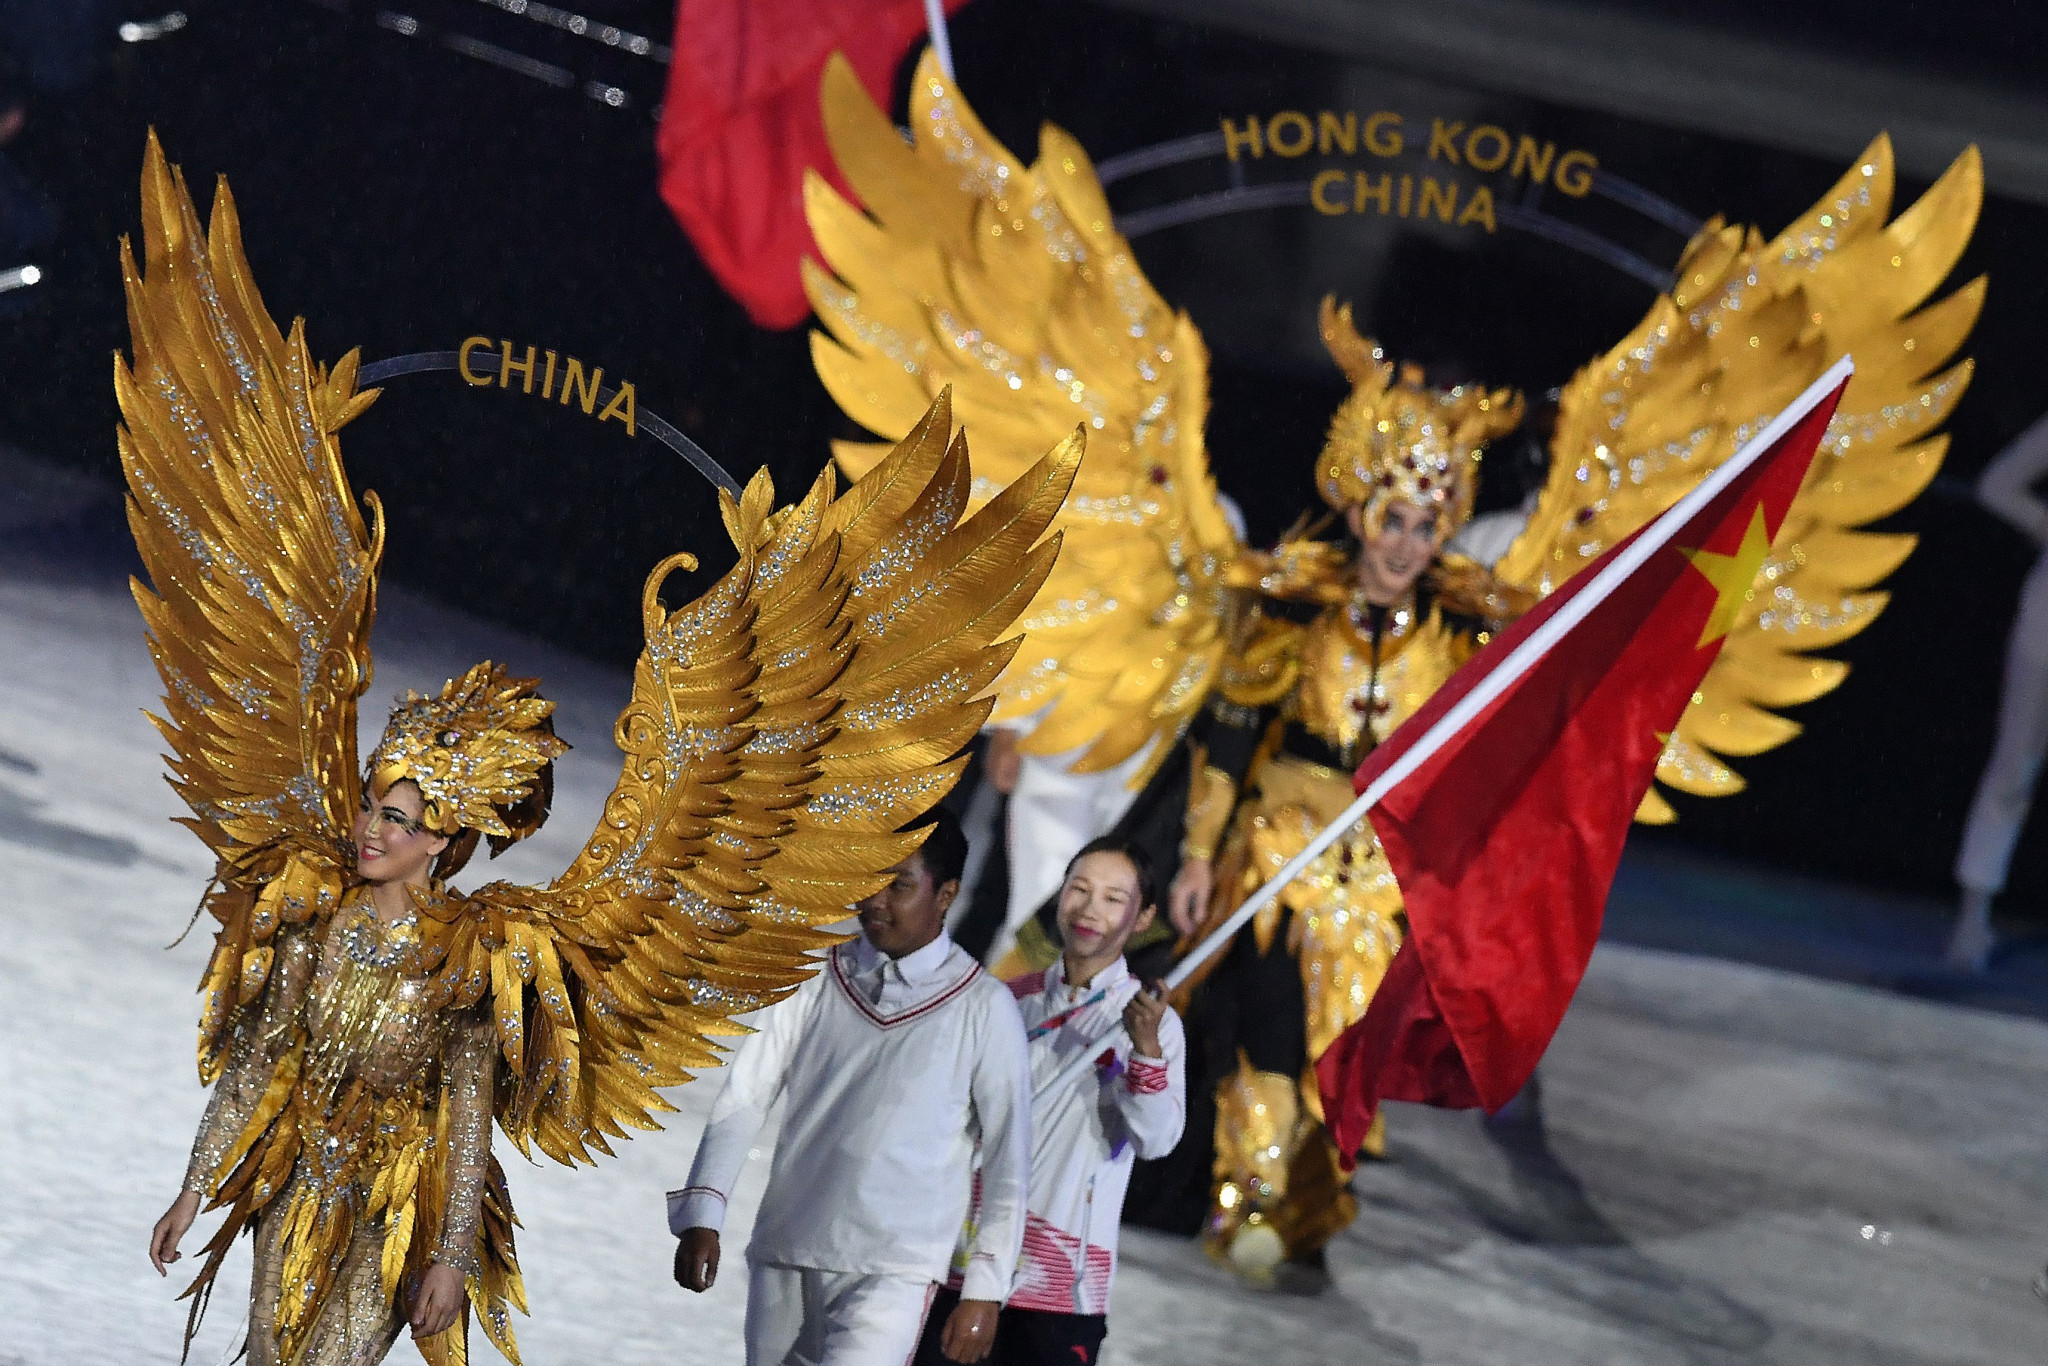 China, who topped the 2018 Asian Games medal table with 132 golds, earlier took part in the flag parade along with the other 44 competing nations ©Getty Images